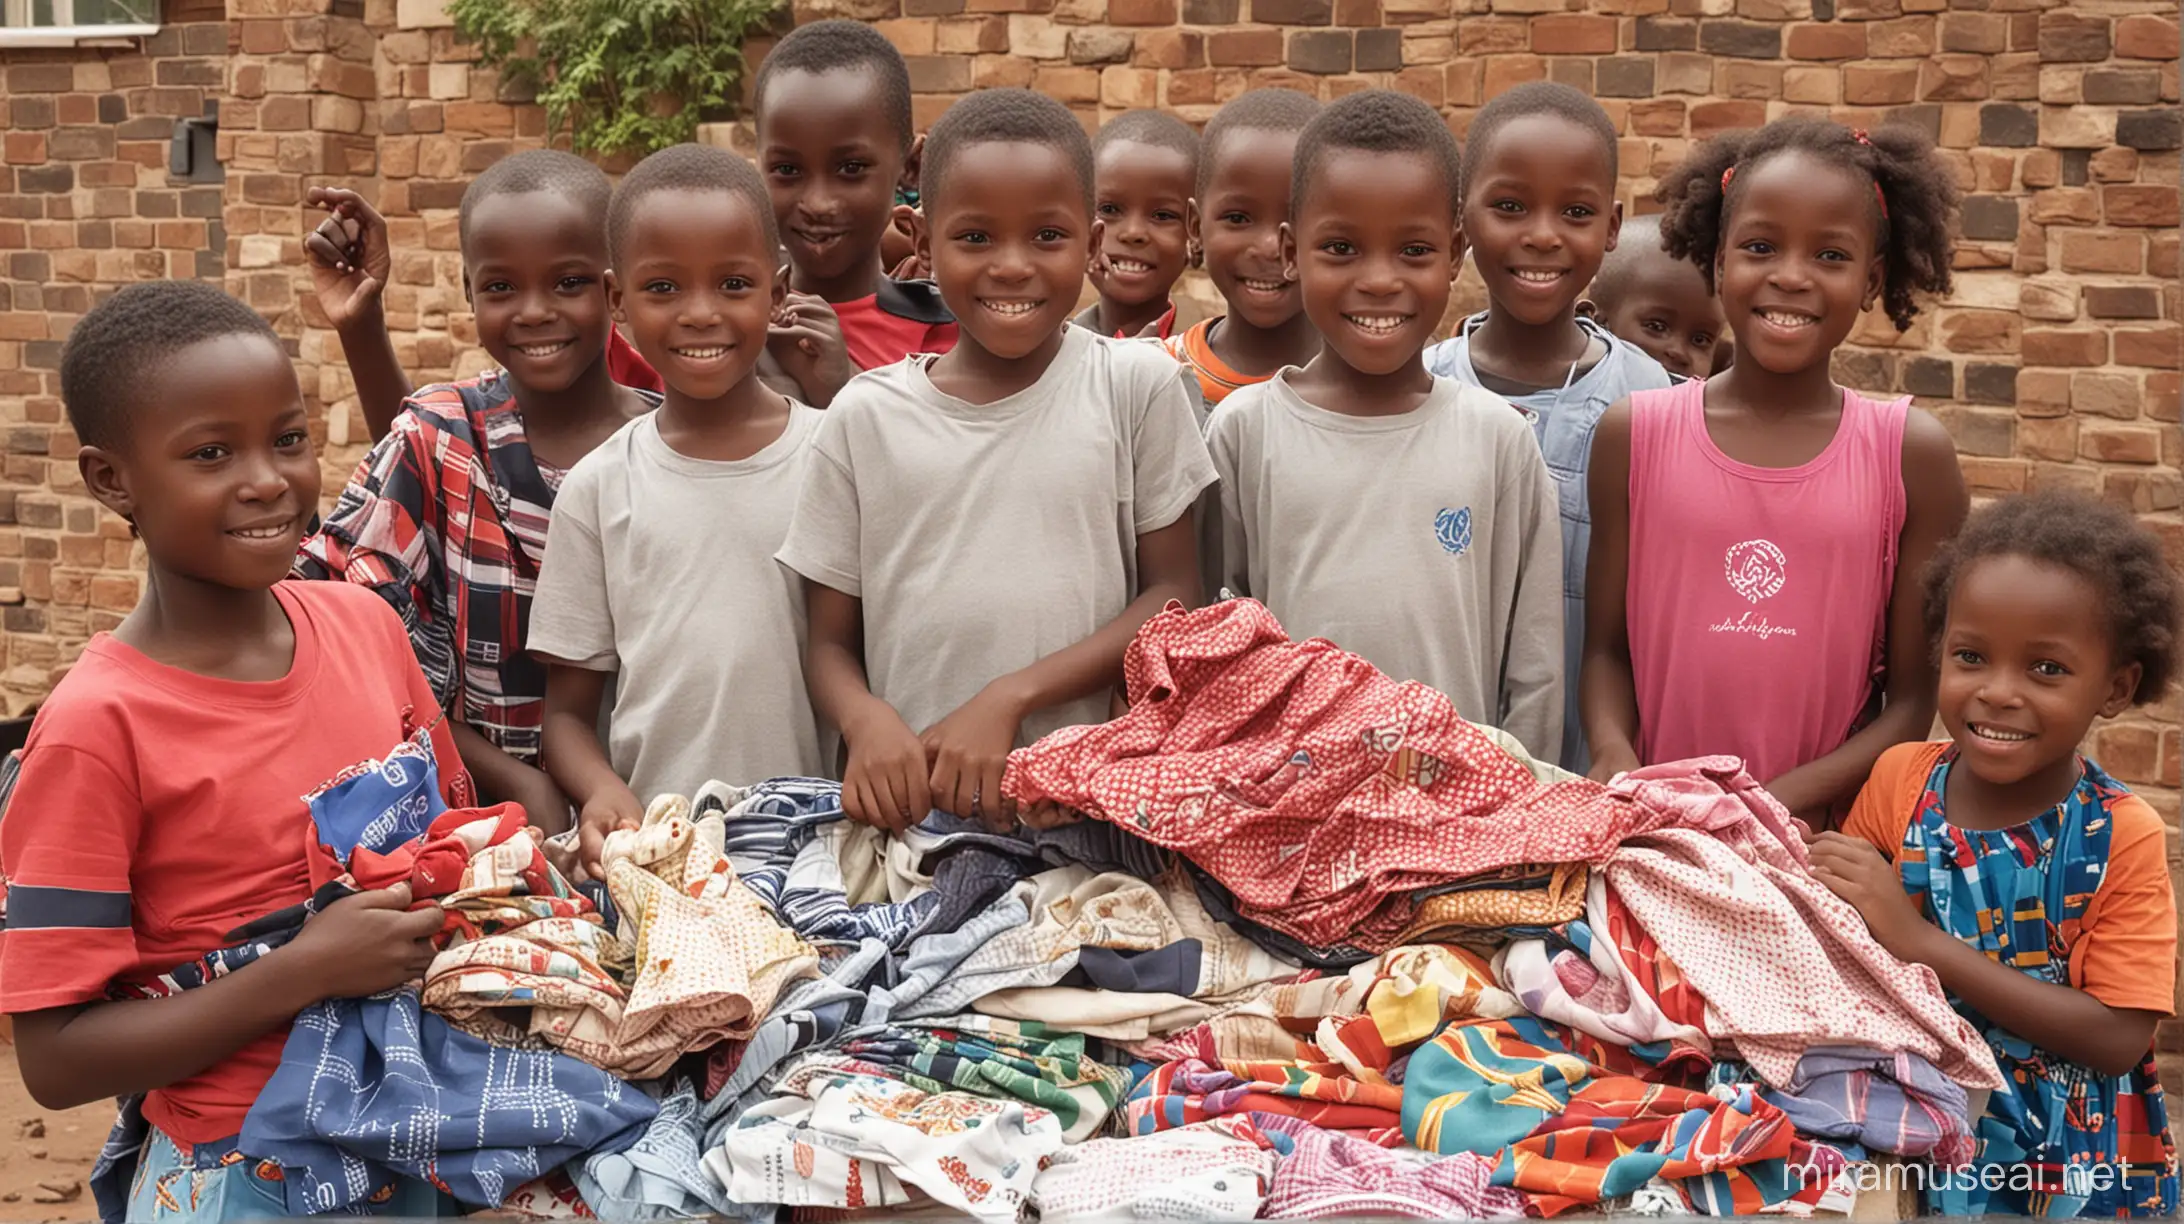 African Children Smiling in Donated Clothing